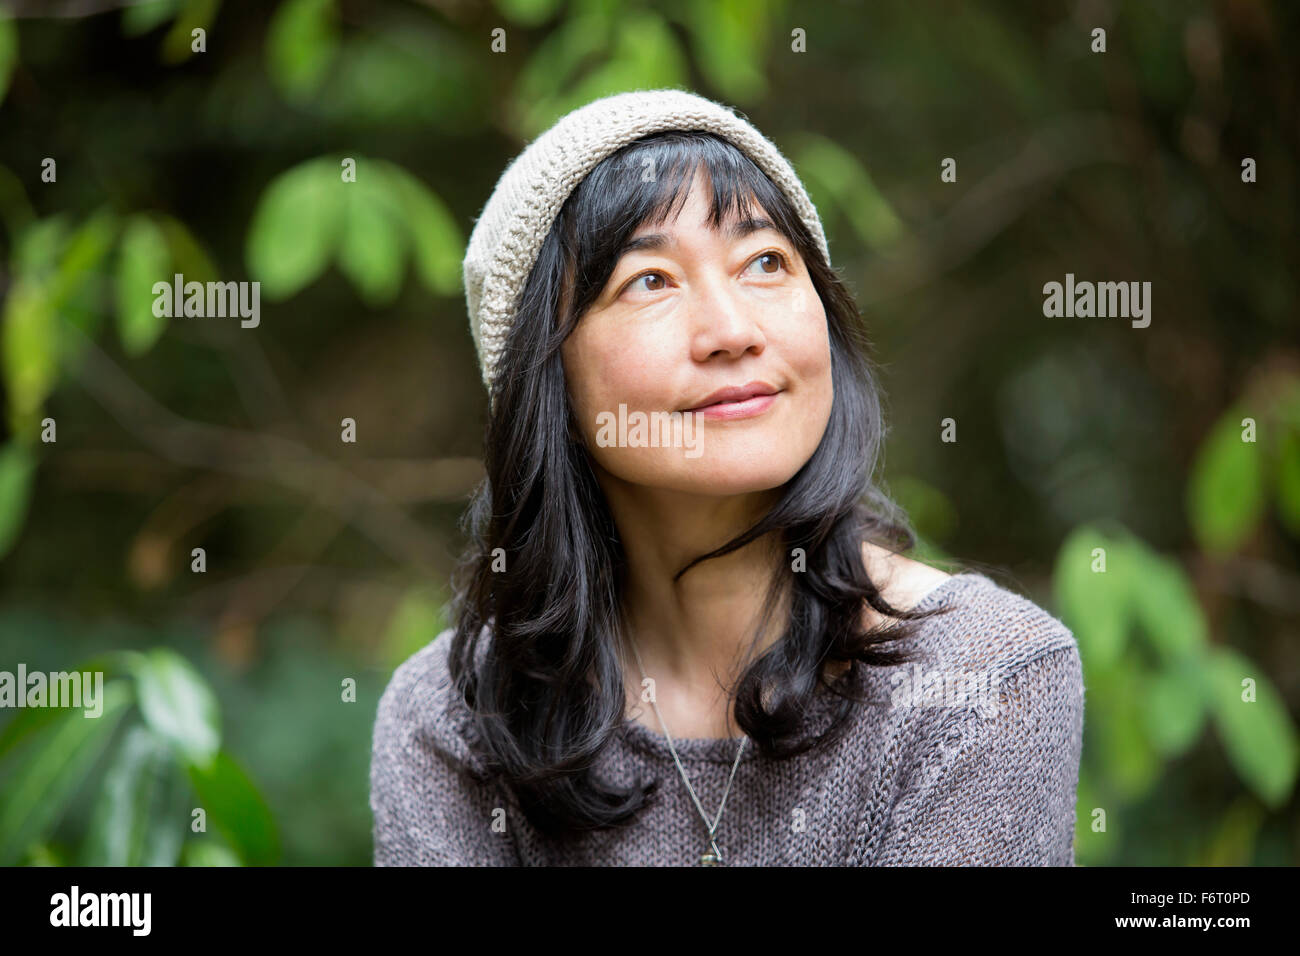 Japanese woman in garden Banque D'Images